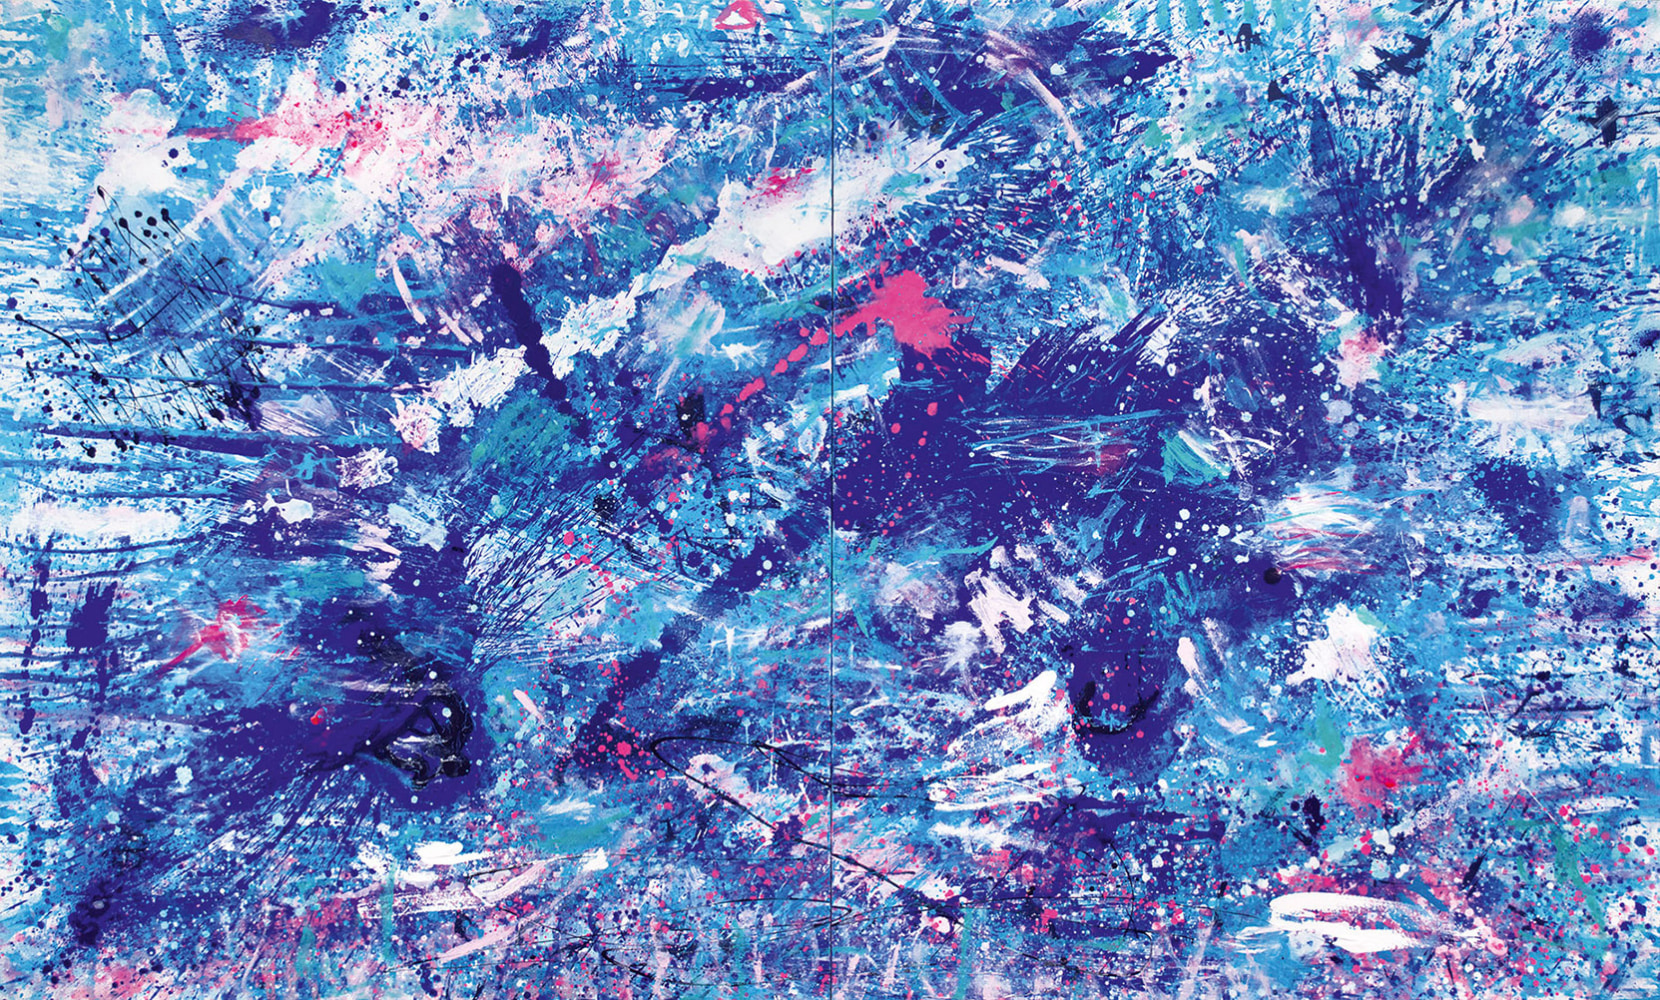 J. Steven Manolis, Splash (Pink Sands), 2016, 72 x 120 inches, Acrylic paintings on canvas, Extra large Wall Art, Blue Abstract Art for sale at Manolis Projects Art Gallery, Miami, Fl